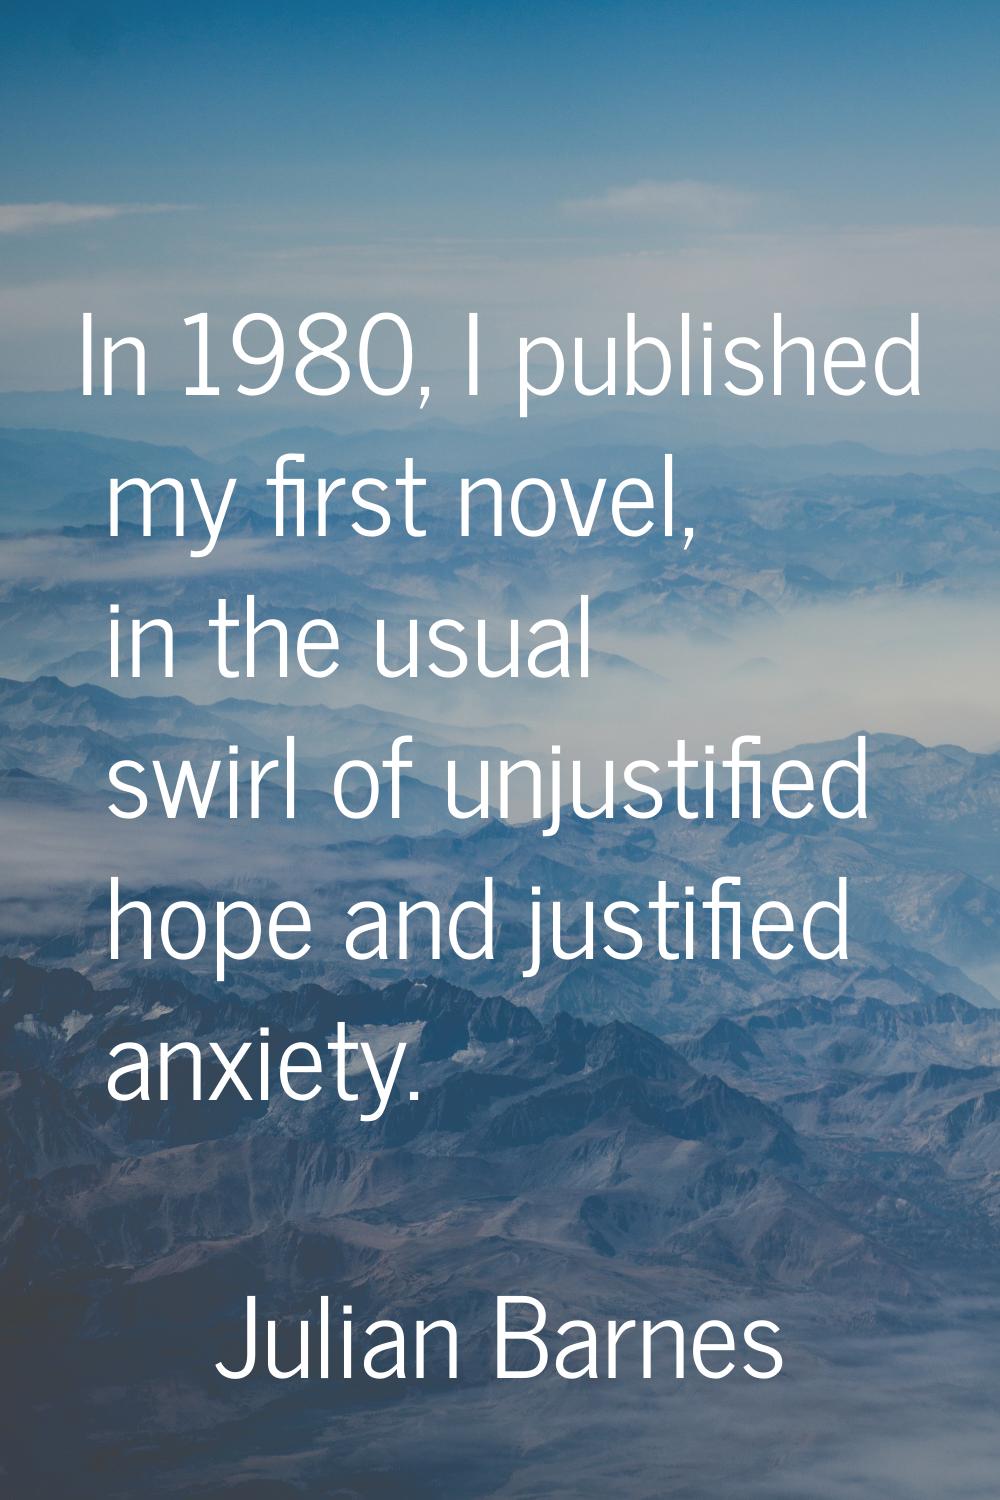 In 1980, I published my first novel, in the usual swirl of unjustified hope and justified anxiety.